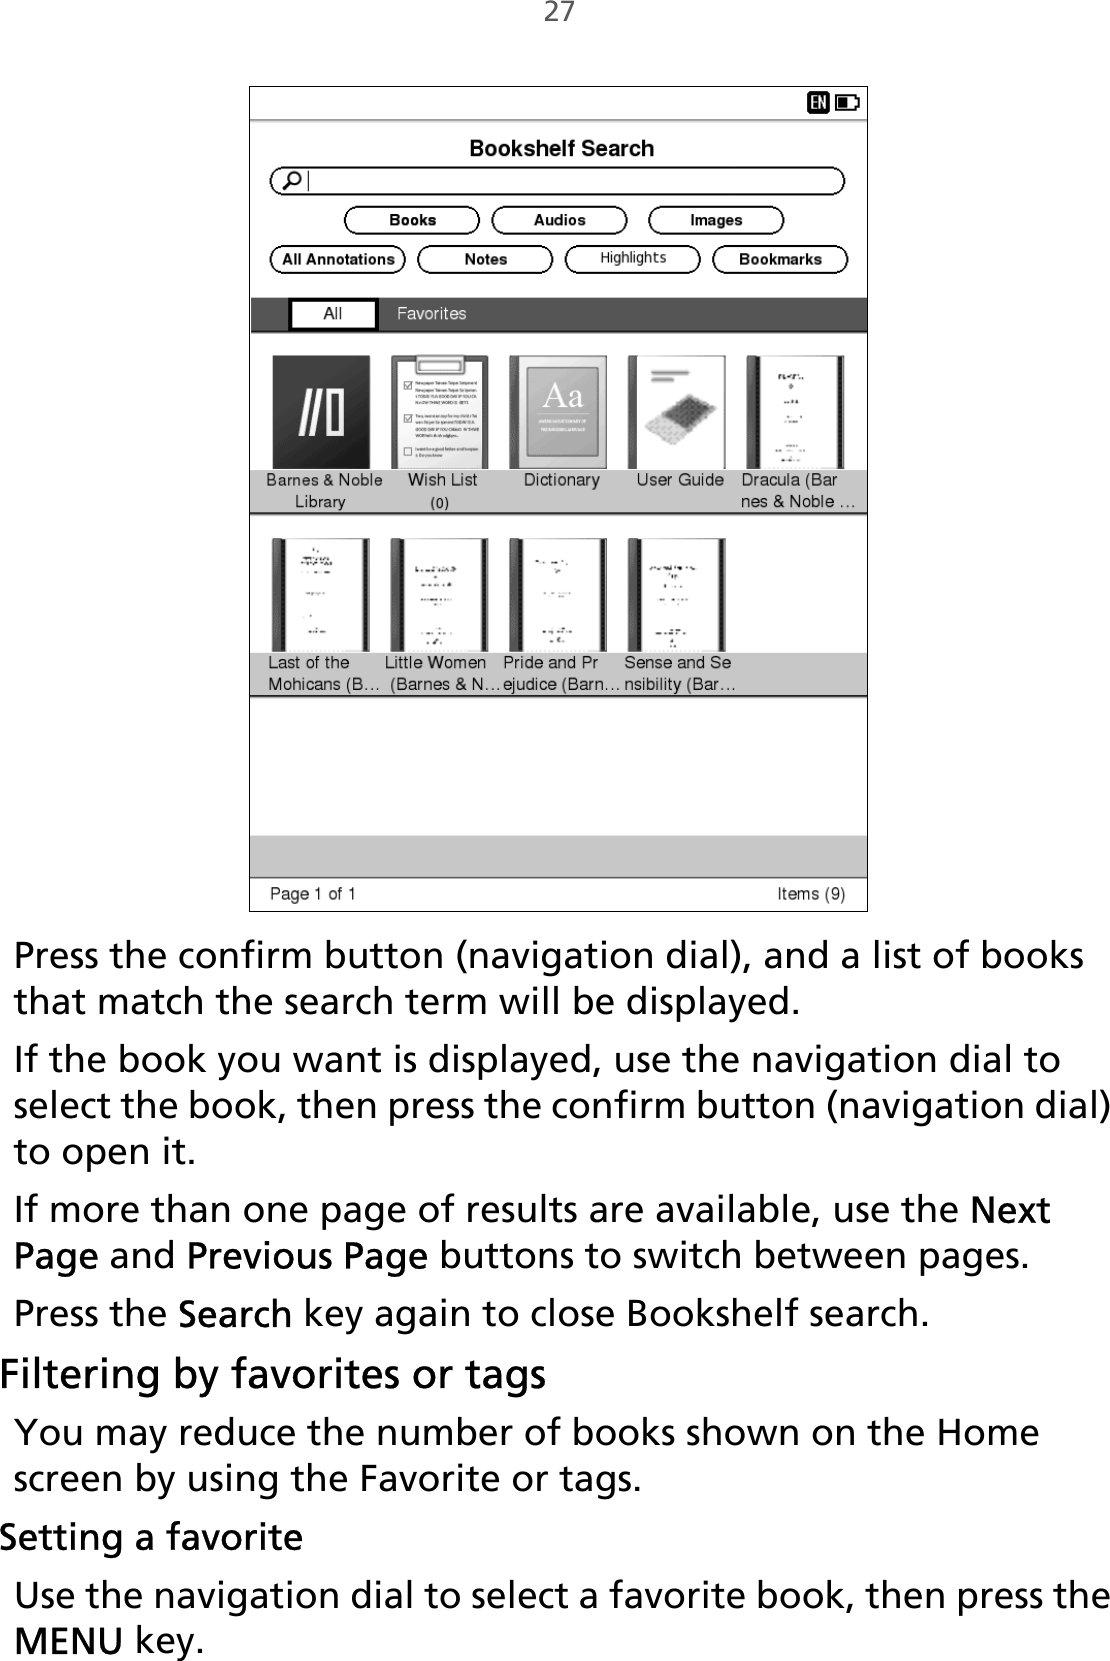 27Press the confirm button (navigation dial), and a list of books that match the search term will be displayed. If the book you want is displayed, use the navigation dial to select the book, then press the confirm button (navigation dial) to open it.If more than one page of results are available, use the Next Page and Previous Page buttons to switch between pages.Press the Search key again to close Bookshelf search.Filtering by favorites or tagsYou may reduce the number of books shown on the Home screen by using the Favorite or tags. Setting a favoriteUse the navigation dial to select a favorite book, then press the MENU key.